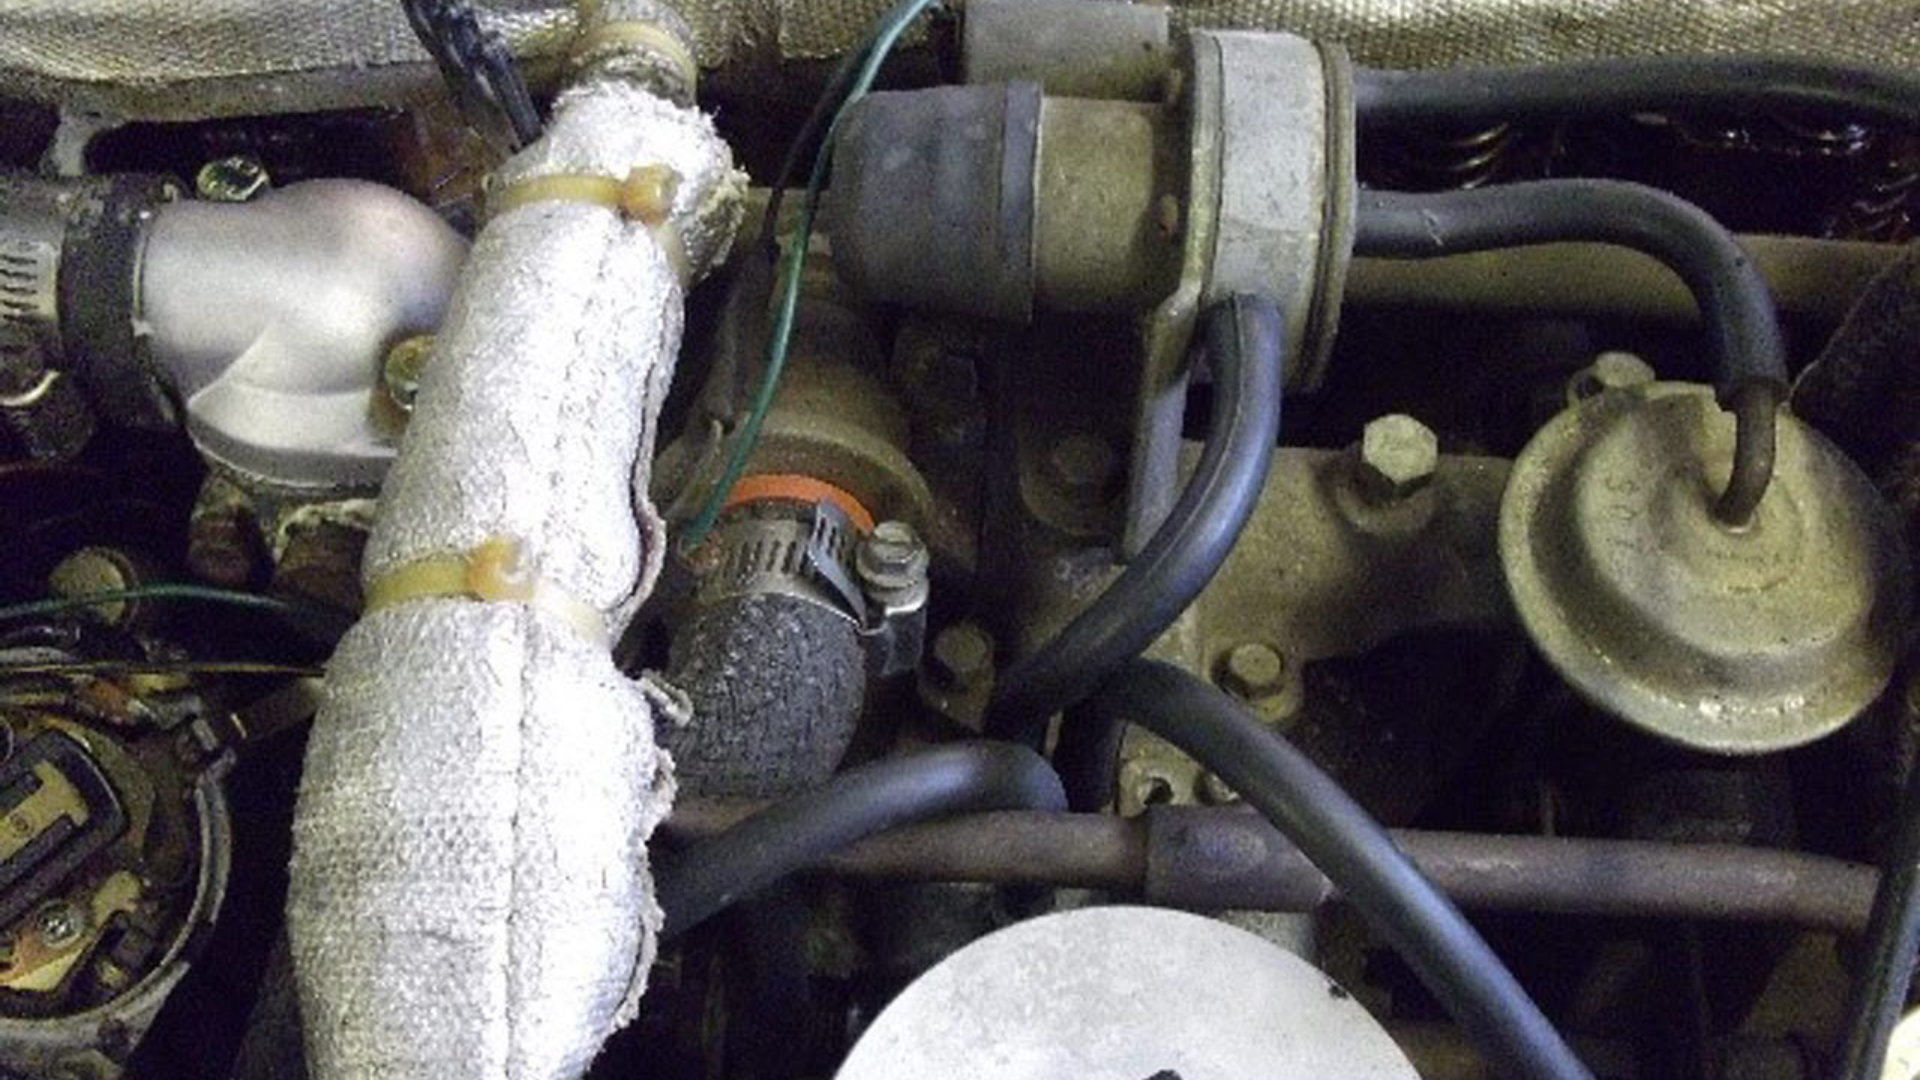 Asbestos heat wrap to exhaust and fuel lines on classic cars